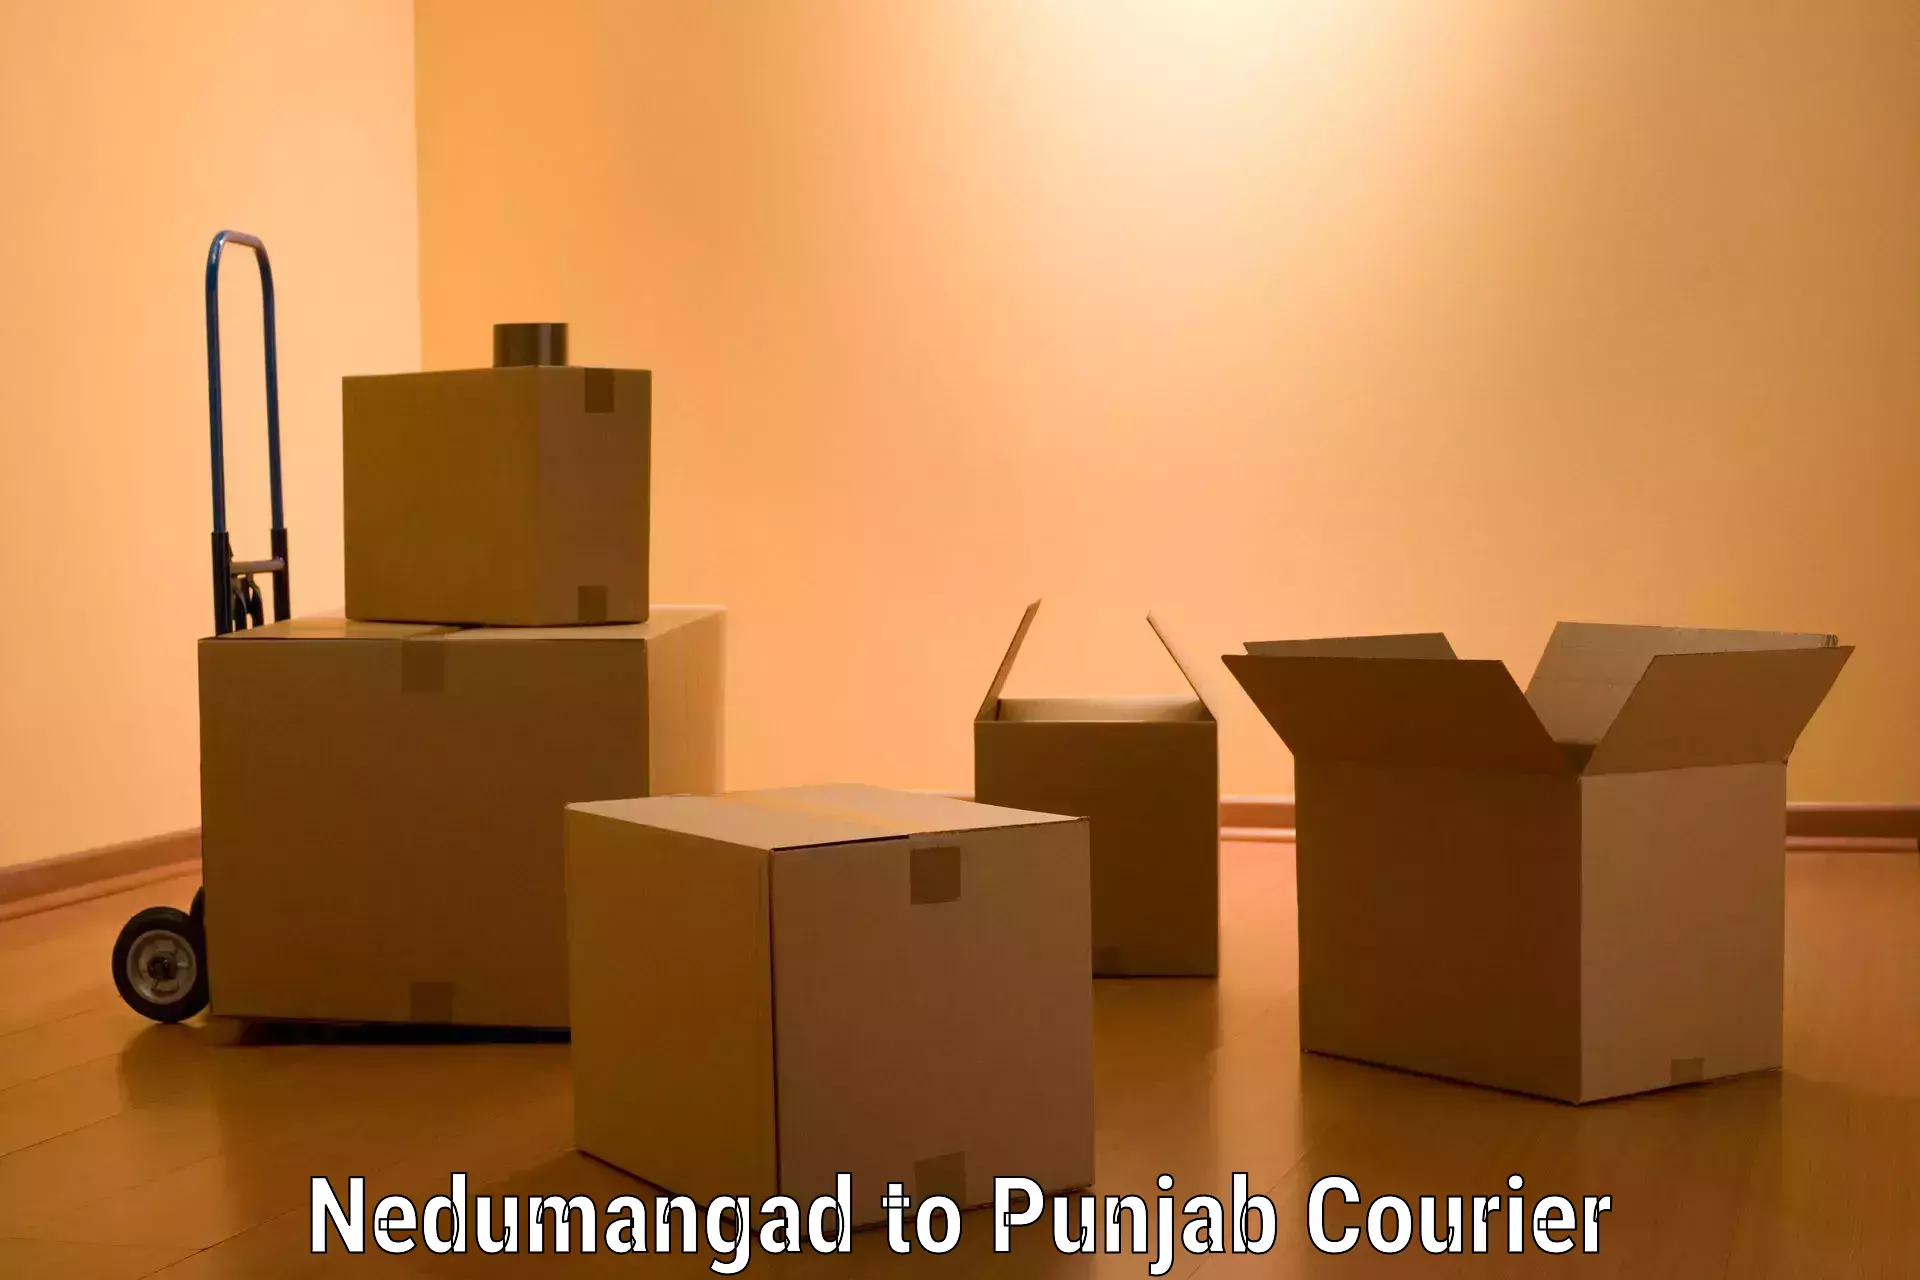 Trusted relocation services Nedumangad to Punjab